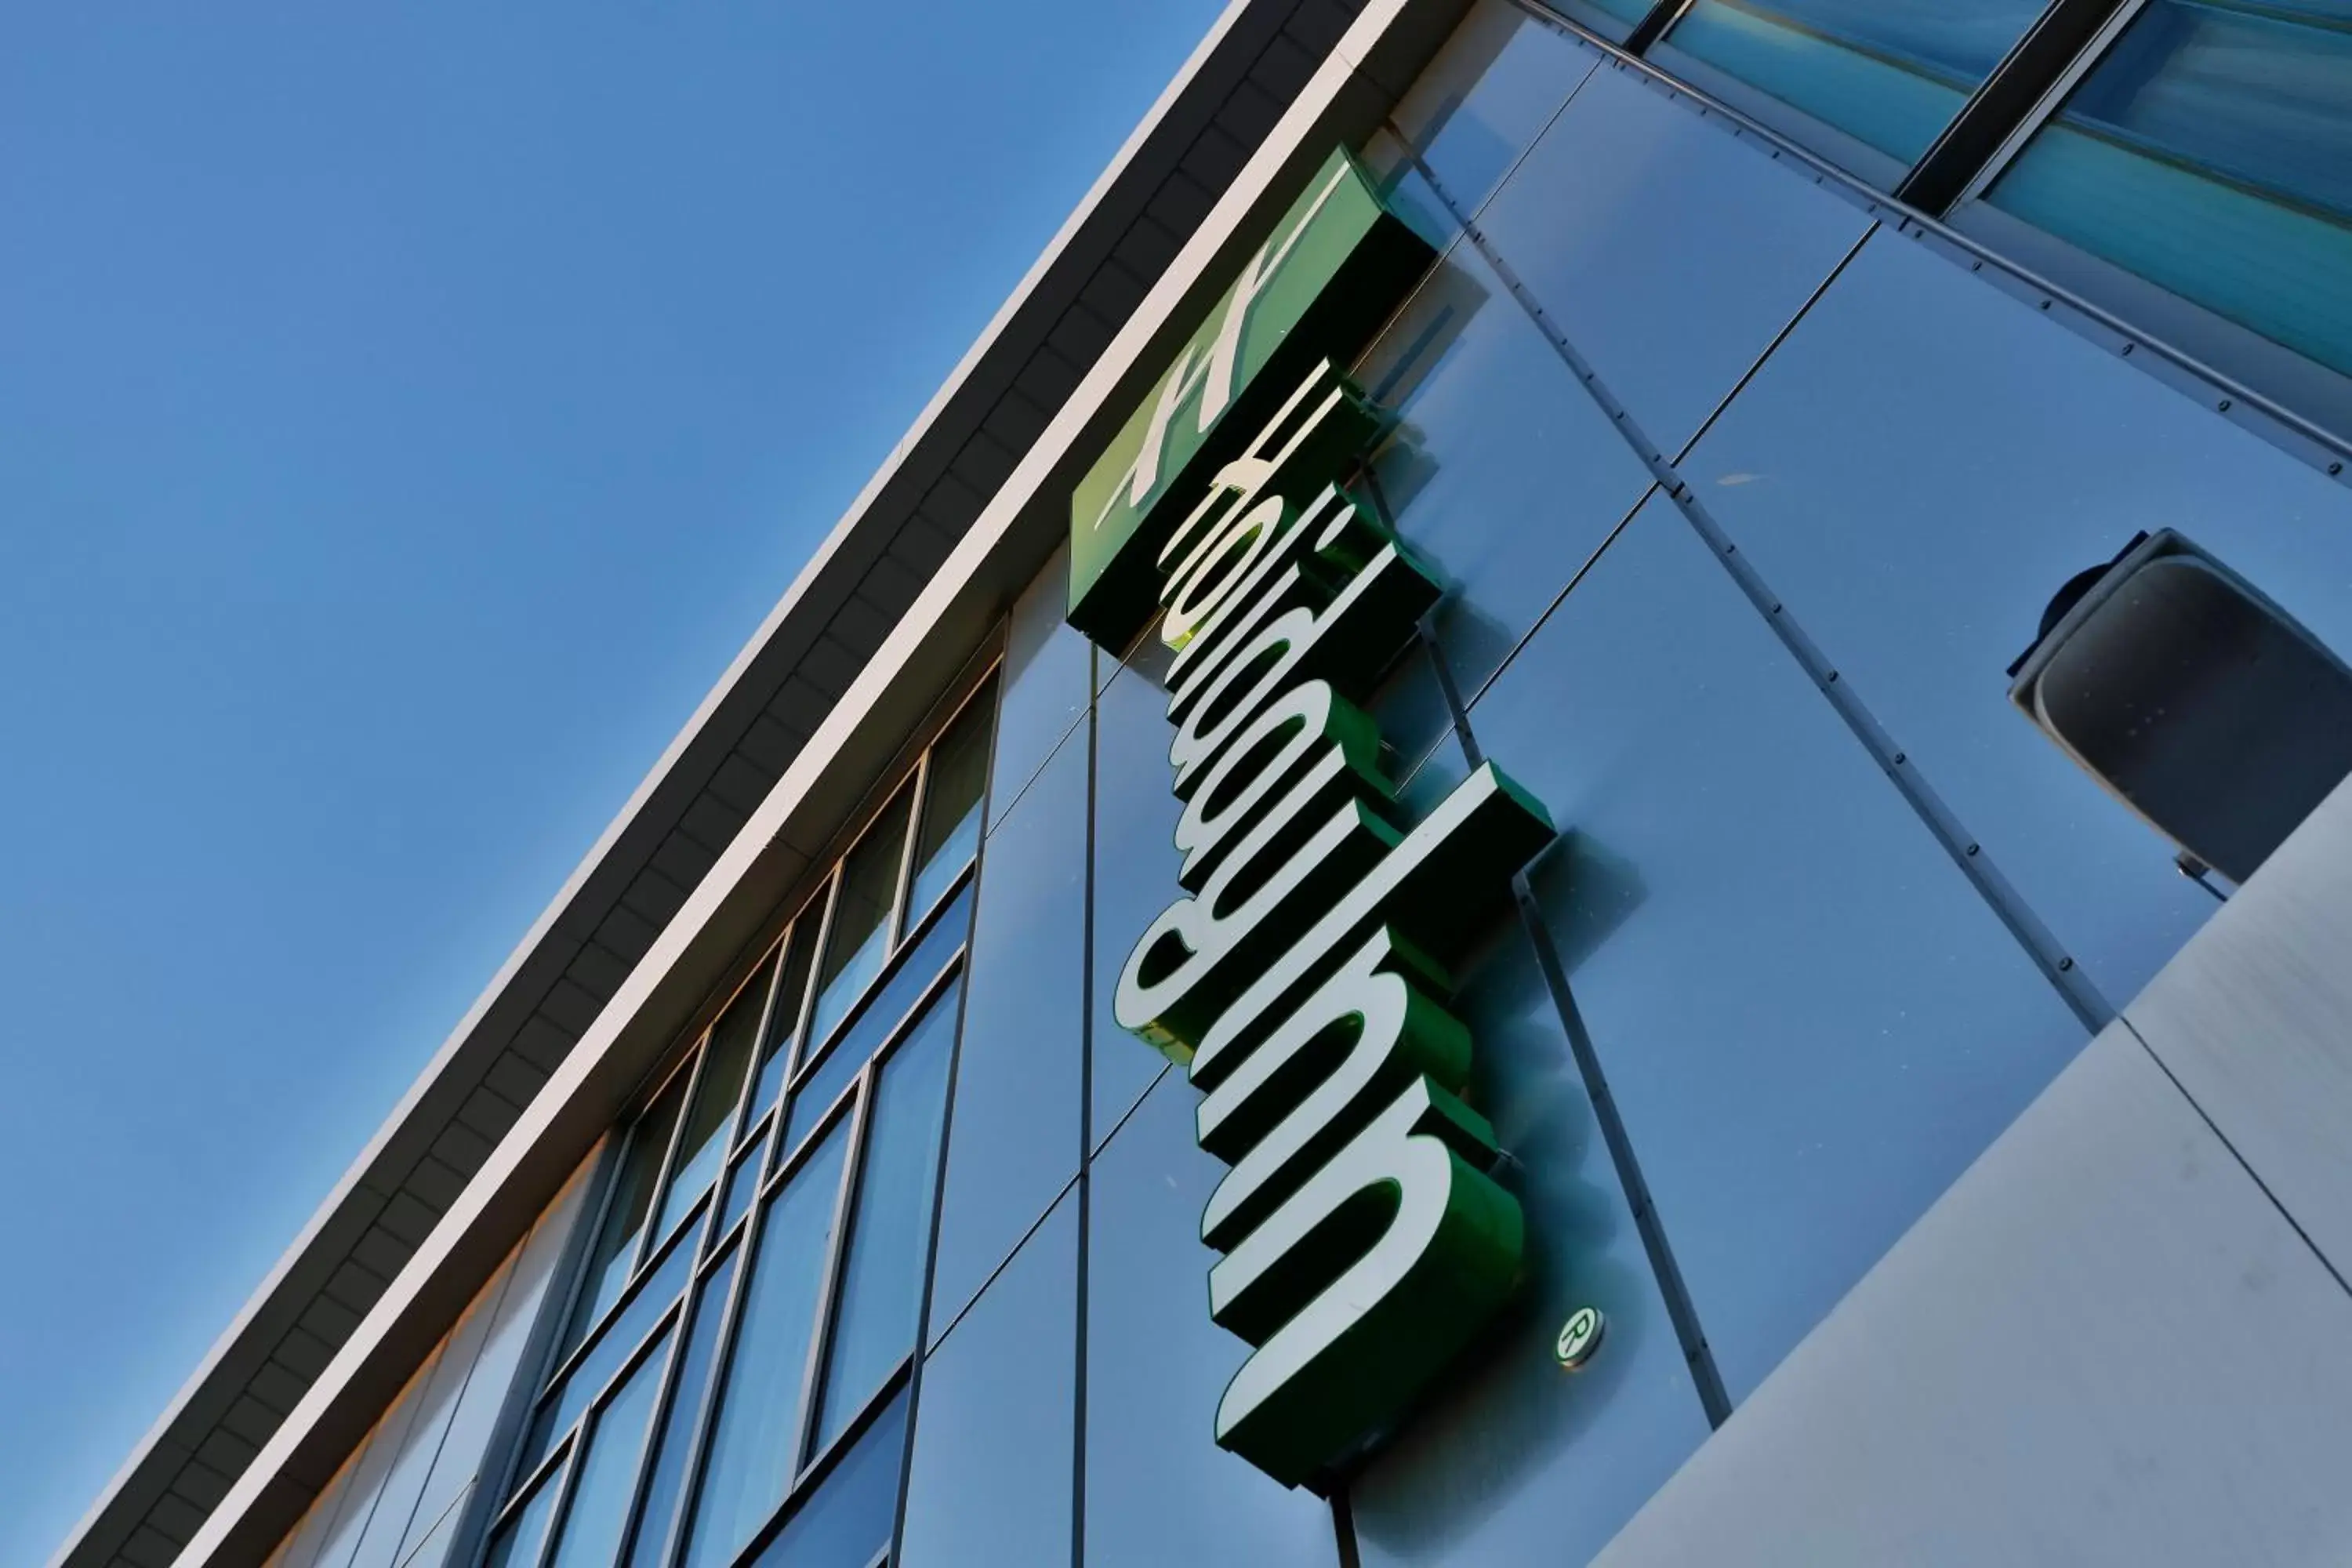 Property Building in Holiday Inn Southend, an IHG Hotel